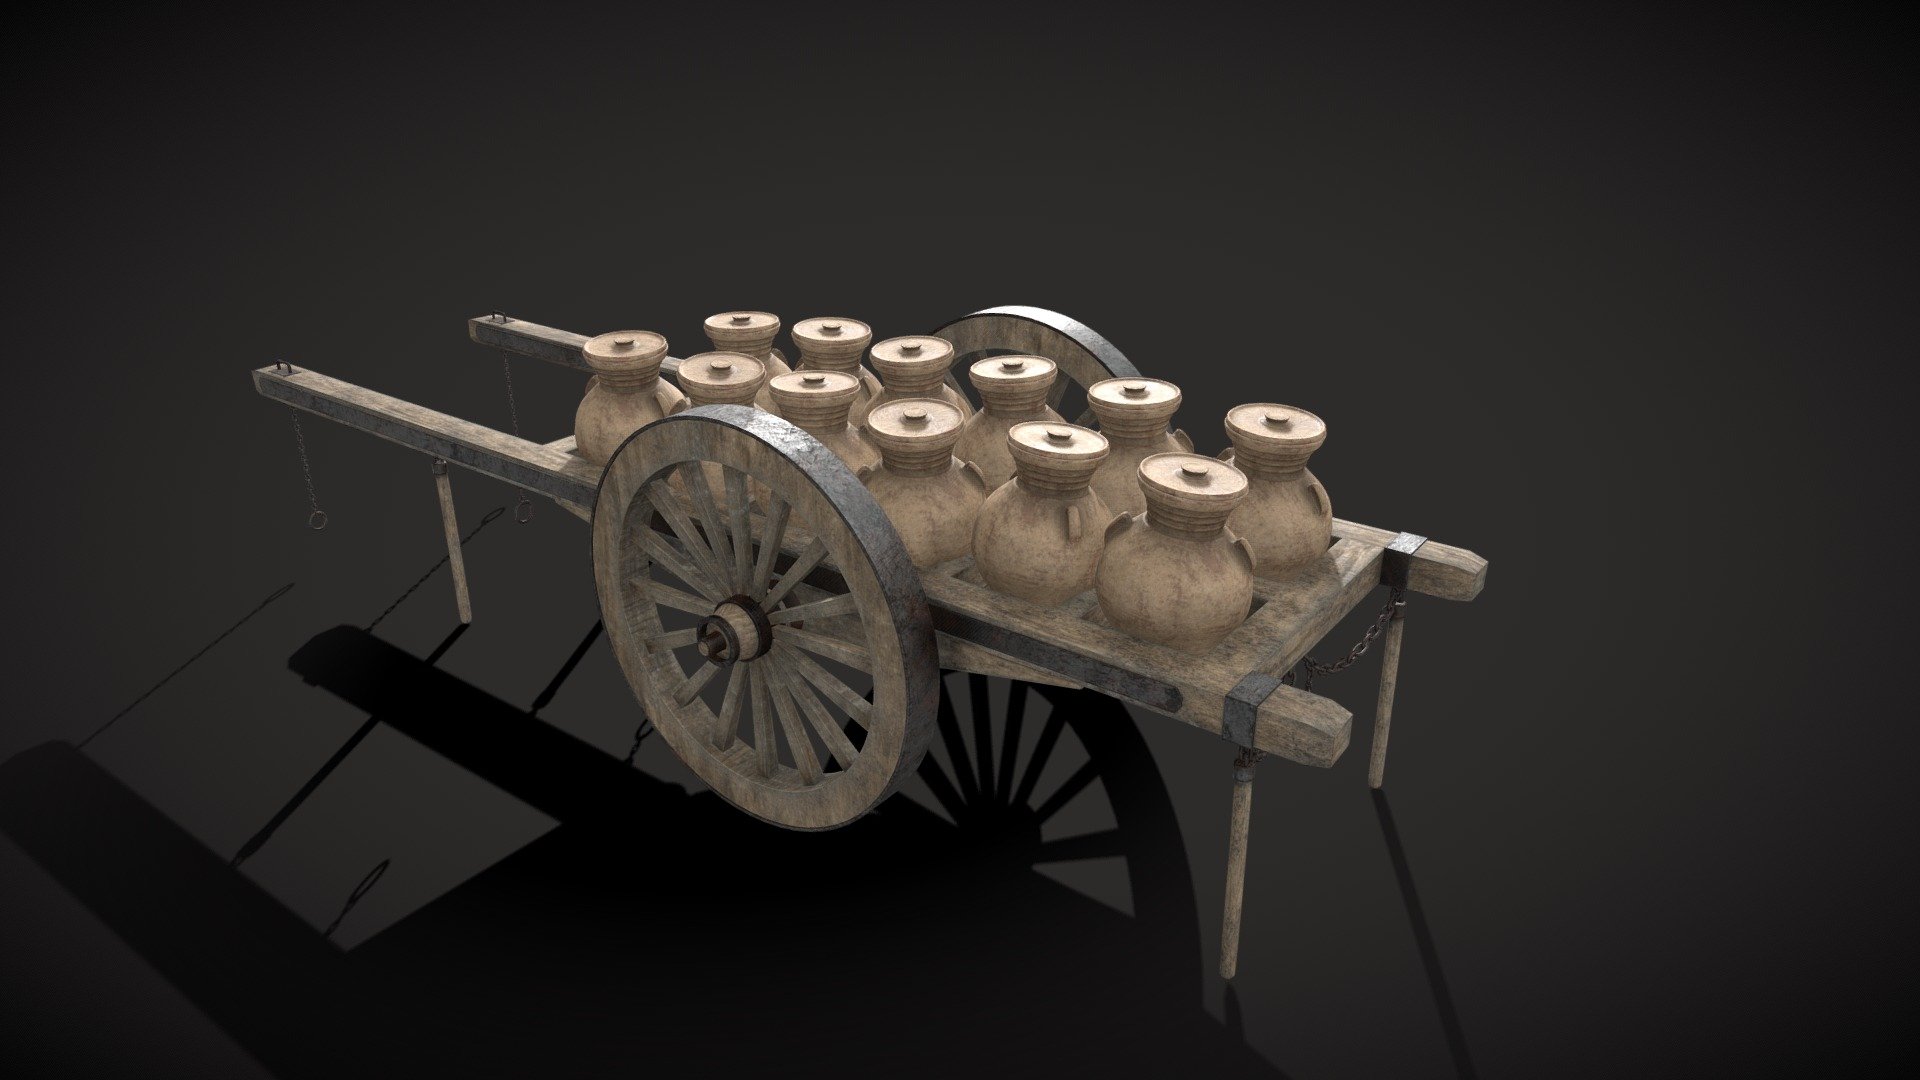 Description

Cart for traditional transport of jars. Of medieval tradition, it was used in Spain until the first half of the 20th century. The jars are held by a system similar to that of cantareras, that is, resting on the holes in the wooden structure of the cart itself. There are extensive references to its use already in medieval times in the plates of the Civitates Orbis Terrarum by Braun and Hogenberg, dated 1576, as well as in the documentary photography of early 20th century photographers. 

Source: https://www.alamyimages.fr/valence-tipos-con-carro-lleno-de-anforas-image246238070.html




Vehicle

8th – 20th century

Medieval

Southern Europe and Northern Africa

More model info




Vertex: 155.240 

Faces: 154.519

Asset modeled in Blender and high quality PBR (Diffuse/ Metalness/ Roughness/ Normal_OpenGL) textures in Substance Painter at 4k 2k and 1k resolution. FBX and OBJ and .blend files to work with any 3D software are available 3d model